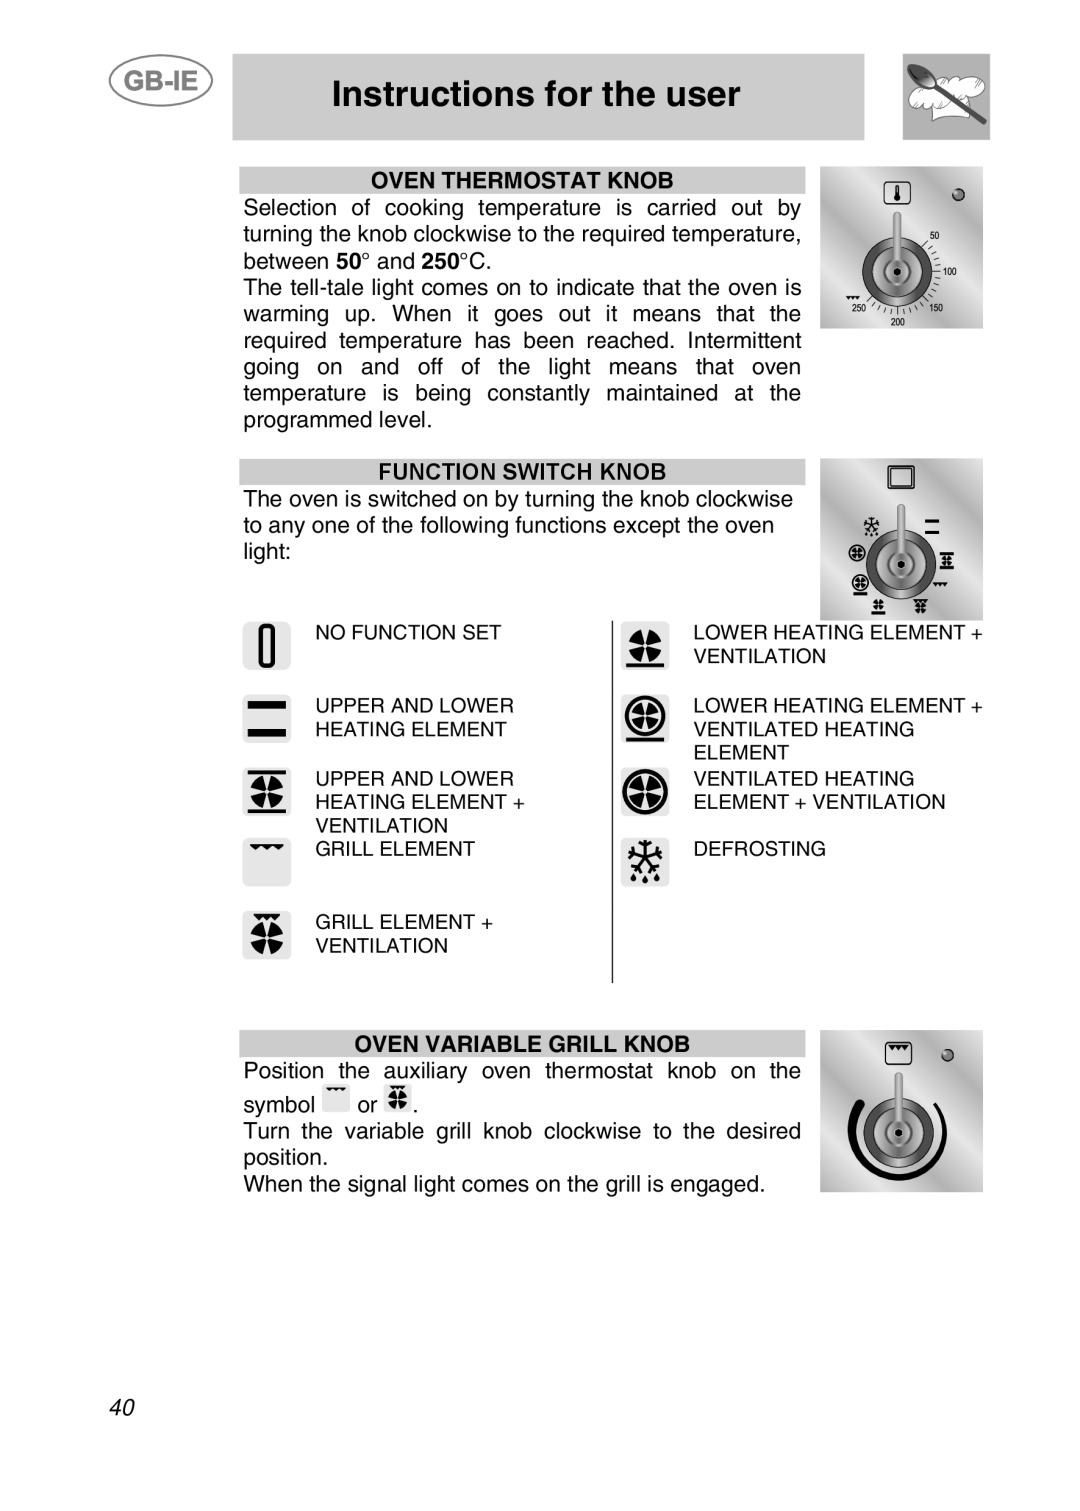 Smeg CS71-5 manual Oven Thermostat Knob, Oven Variable Grill Knob, Instructions for the user, Function Switch Knob 